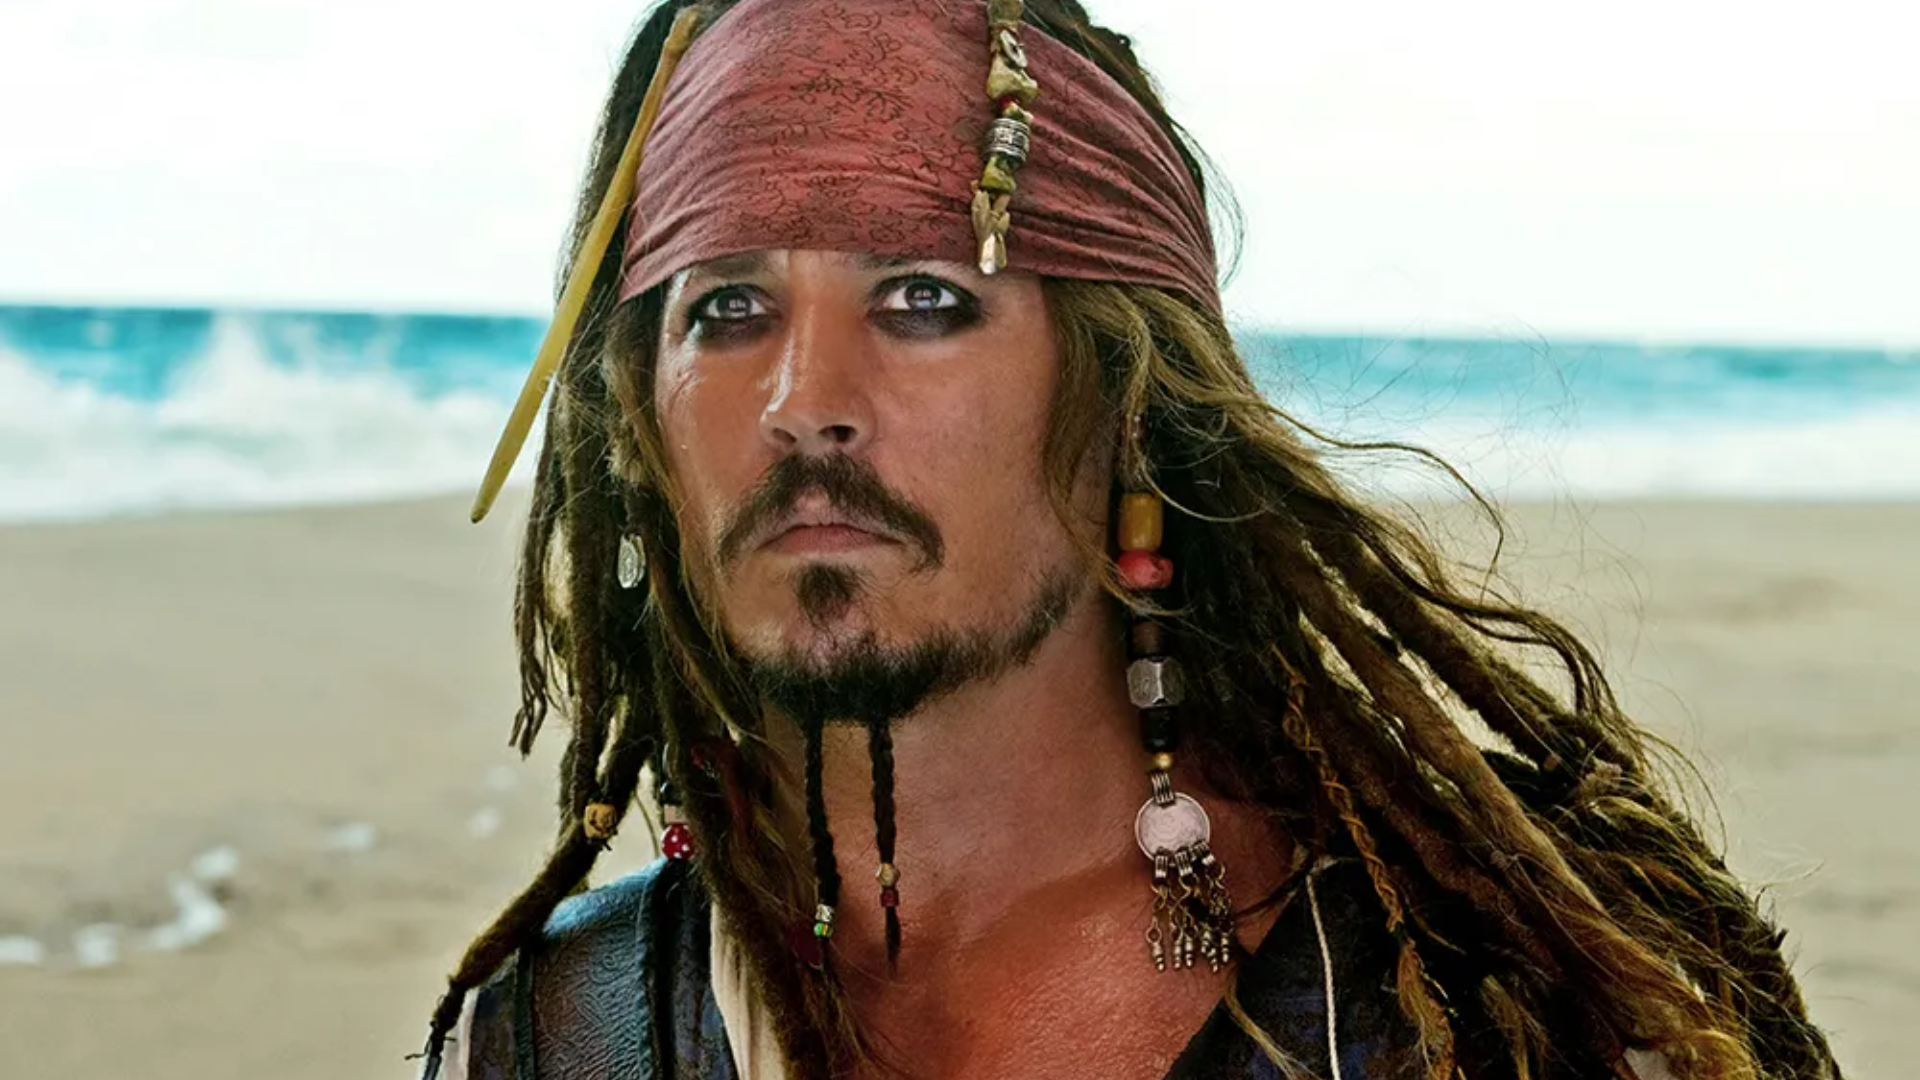 Pirates Of The Caribbean Reboot: Update On Cast, Release Date, Female Lead, And Johnny Depp’s Return